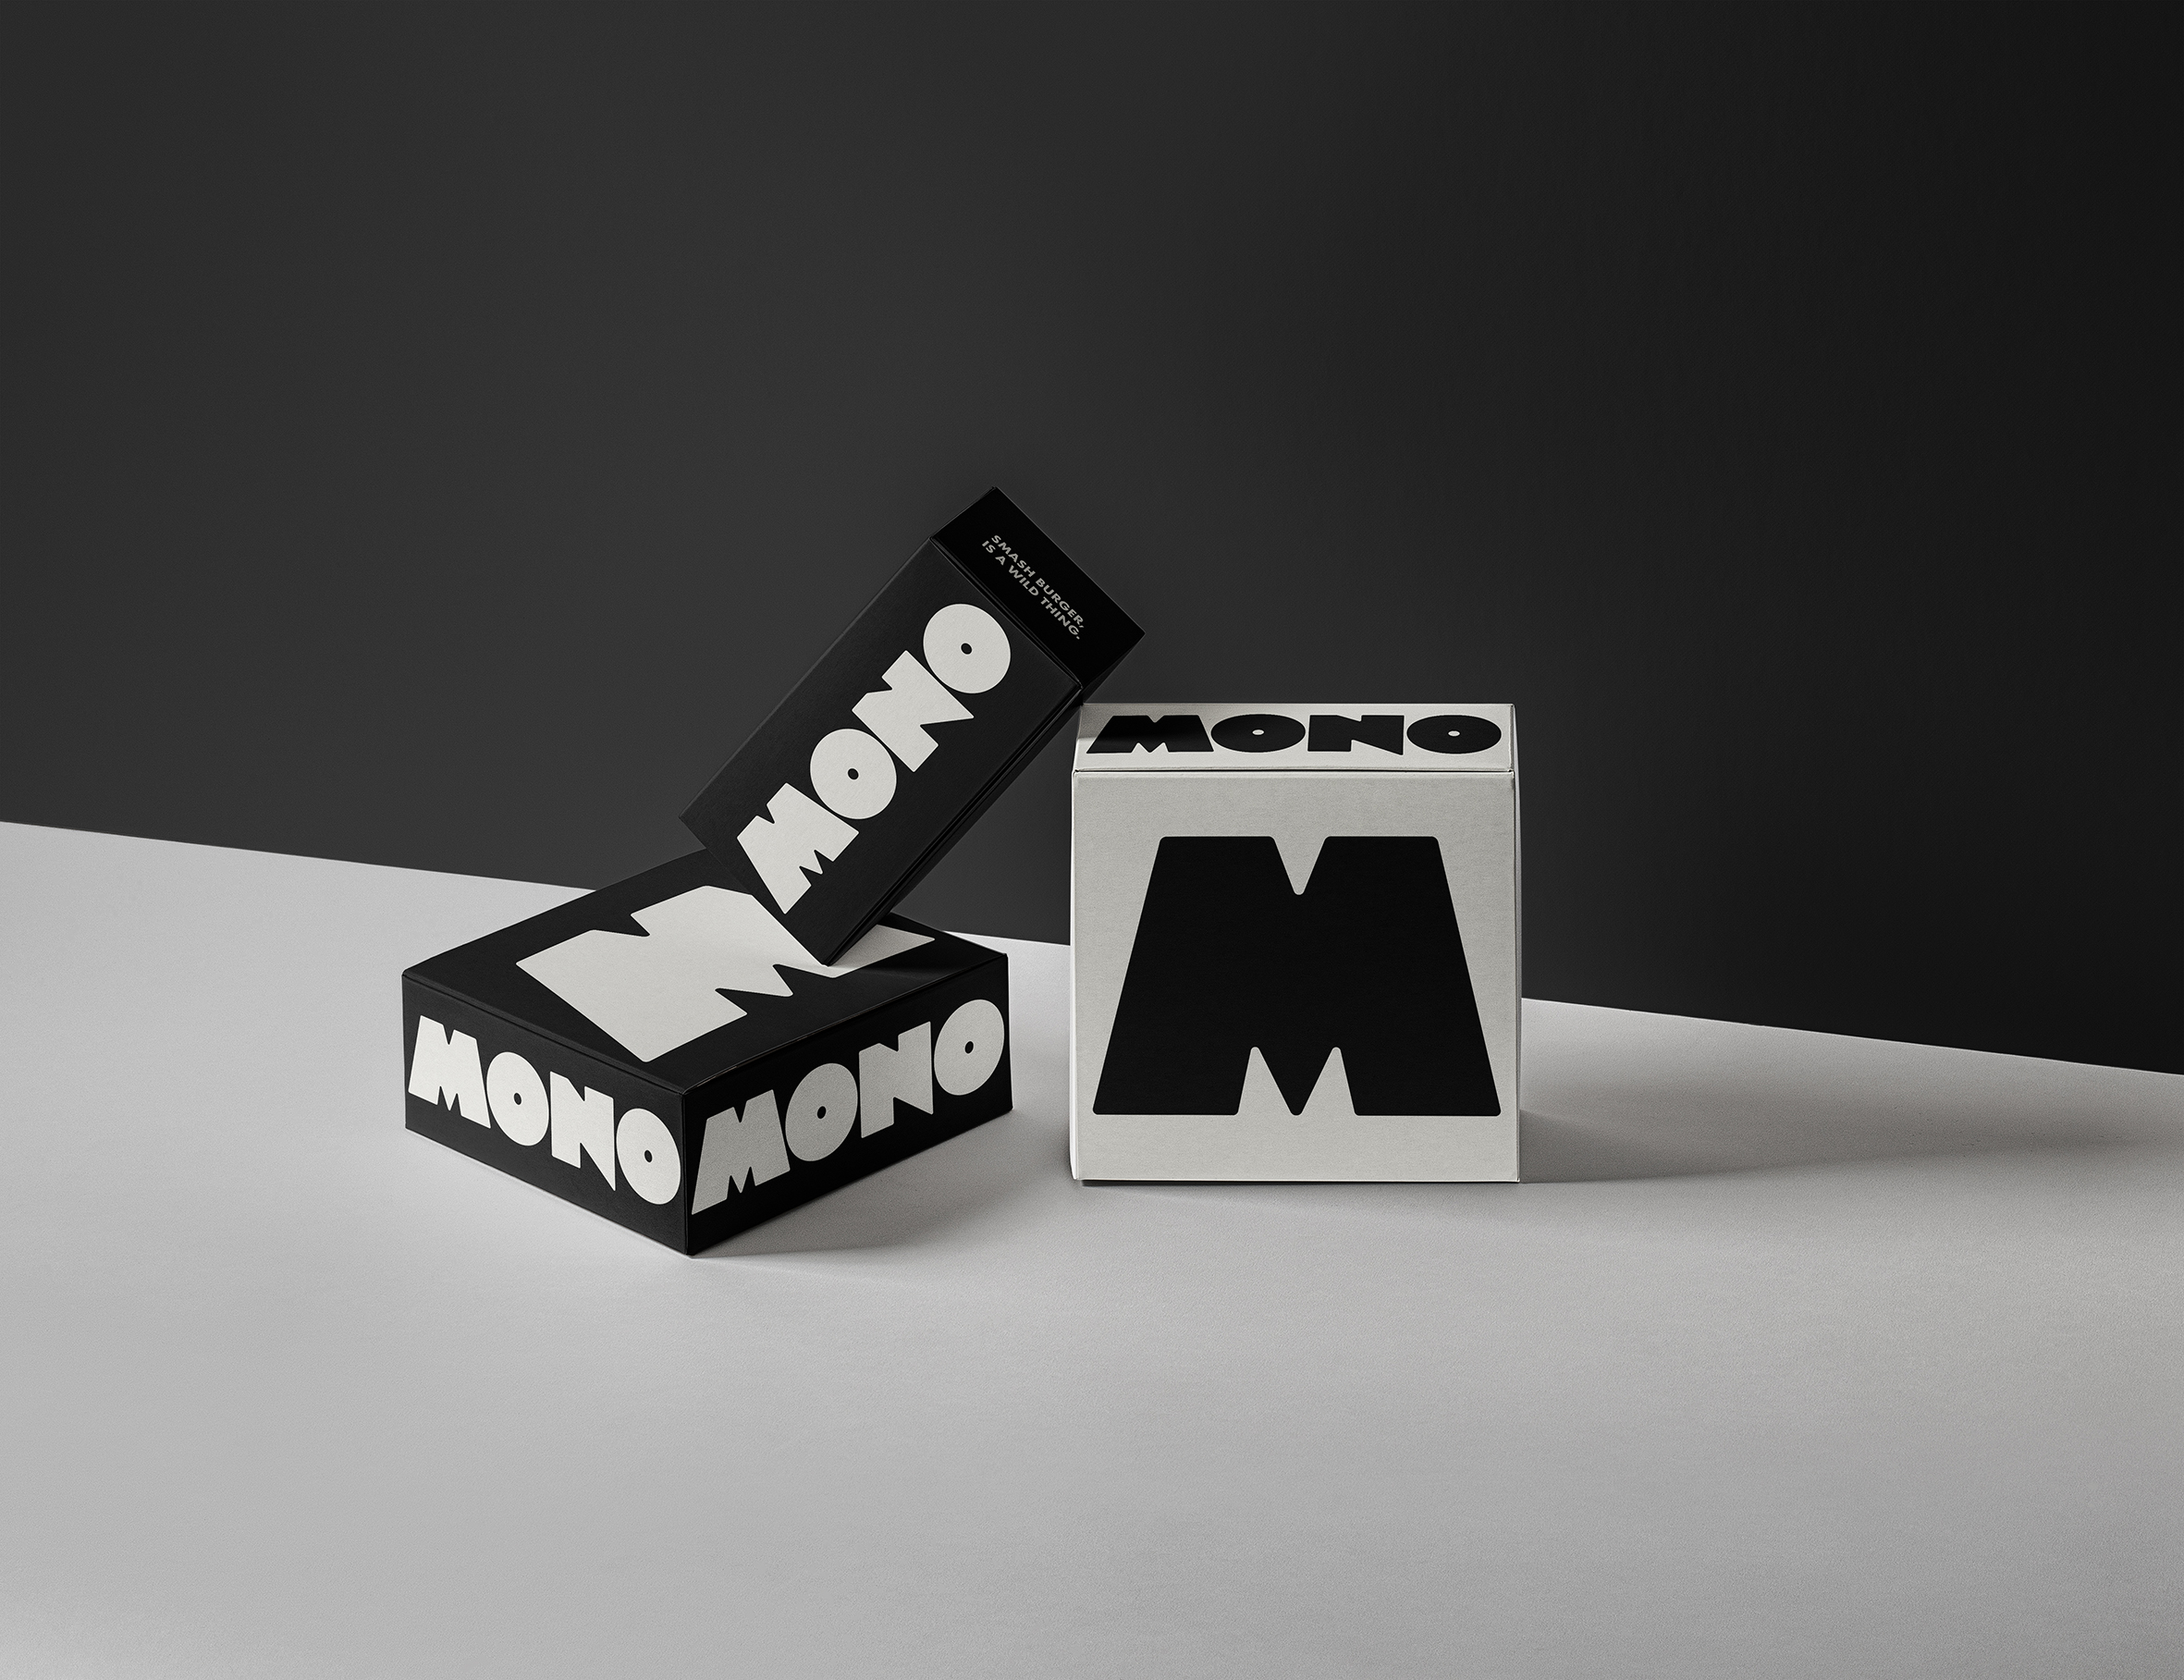 MONO’s Retro-Inspired Packaging Hits All the Right Notes